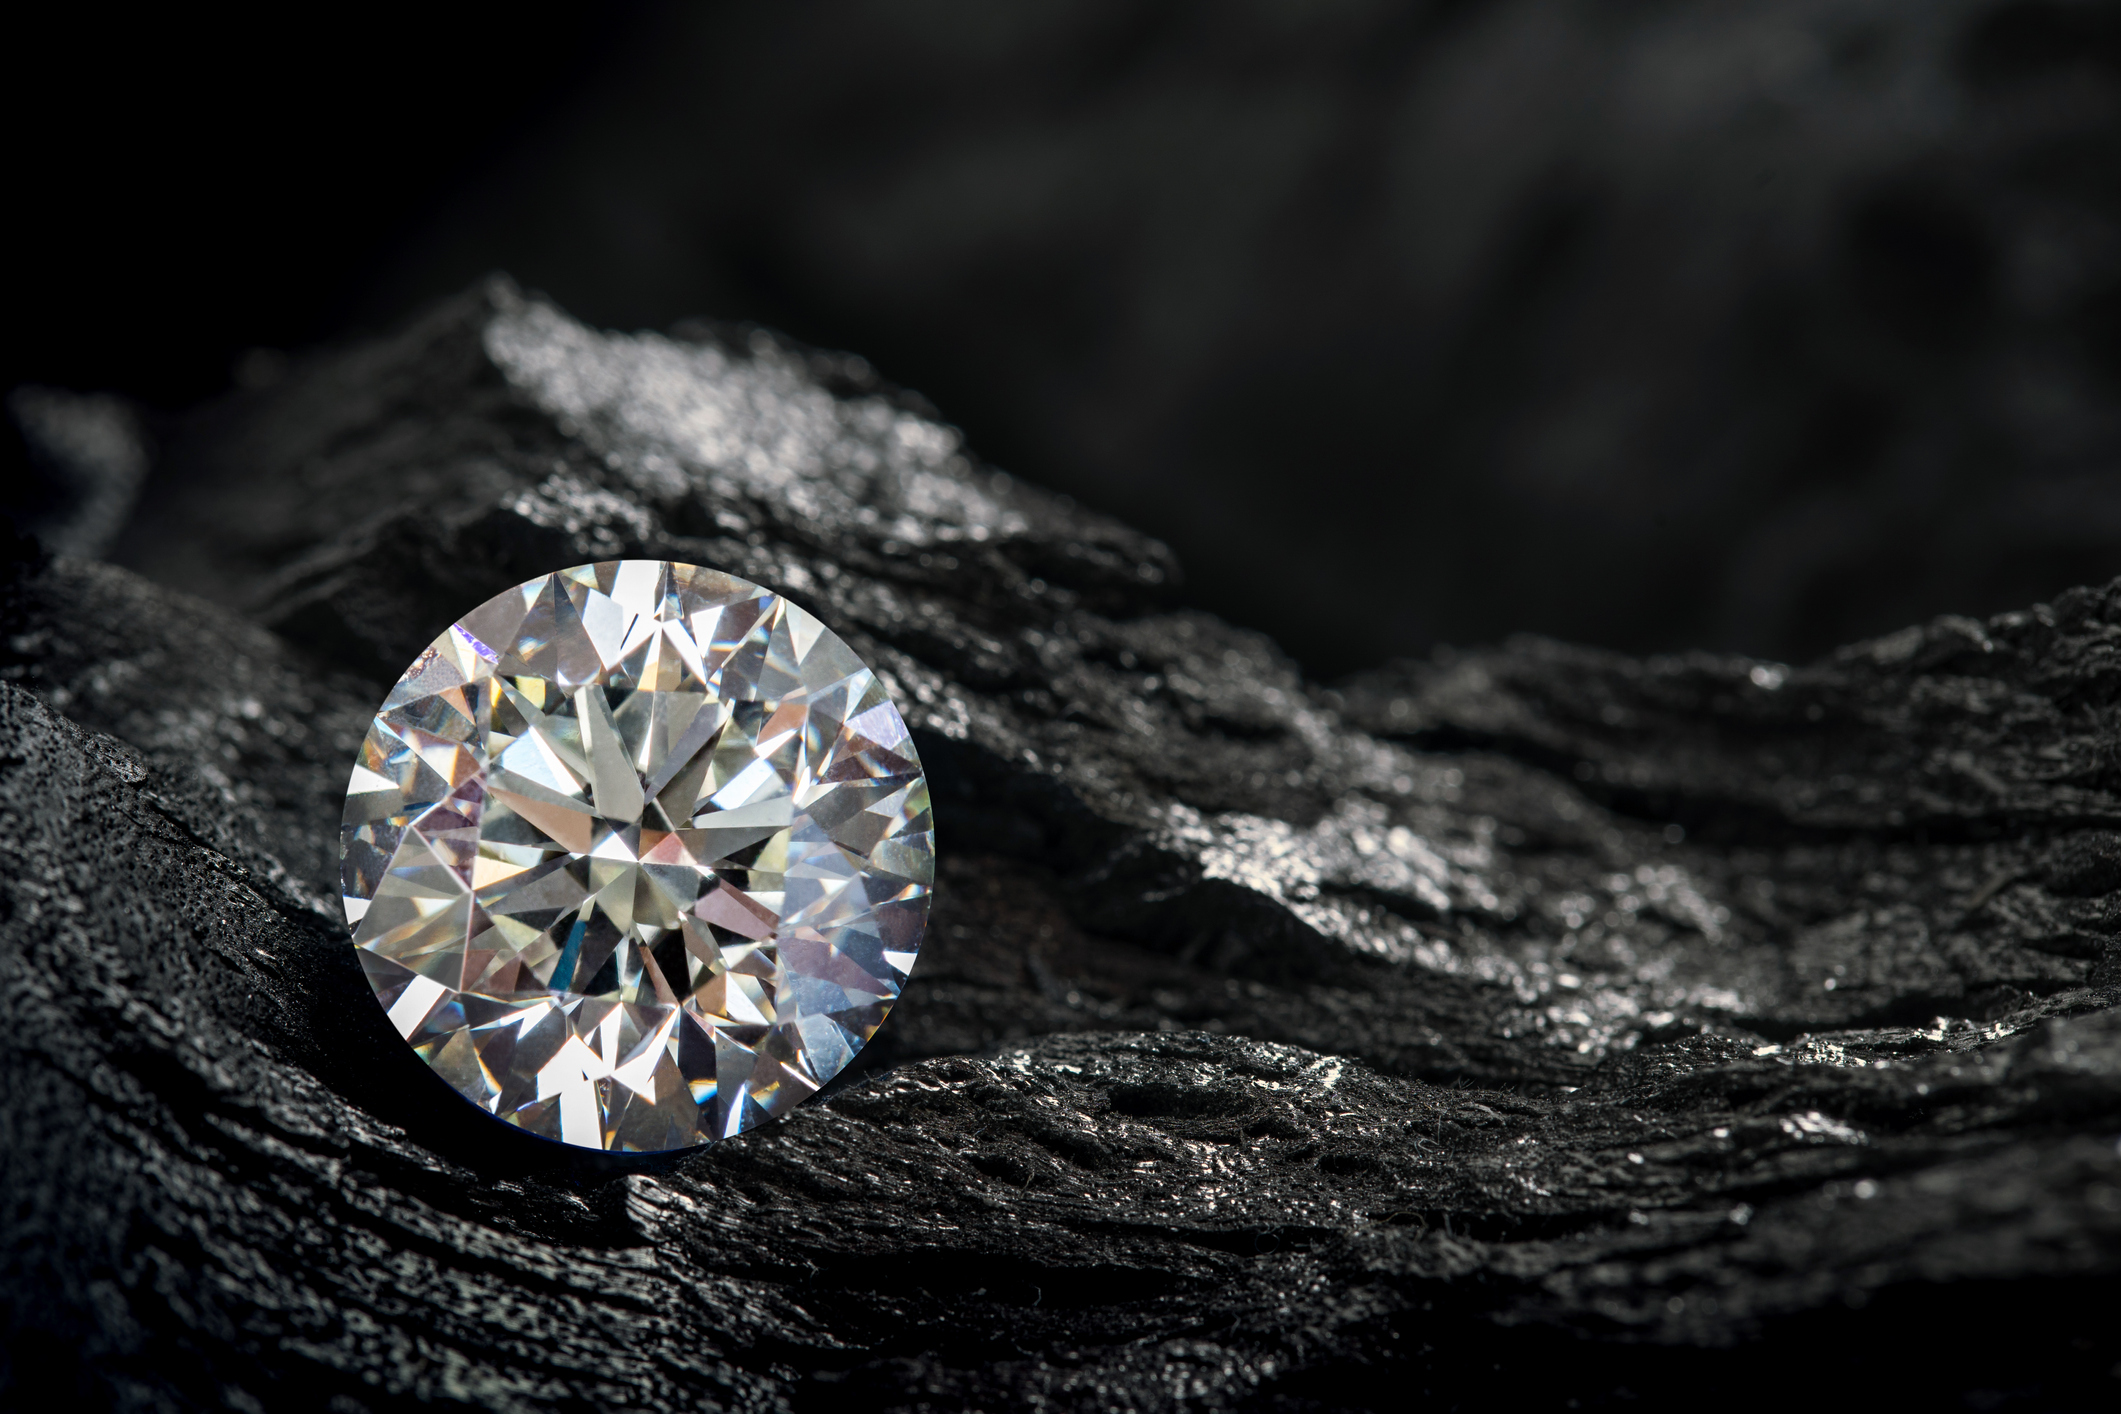 THE EXPERTS IN FINE DIAMONDS AND GEMSTONES